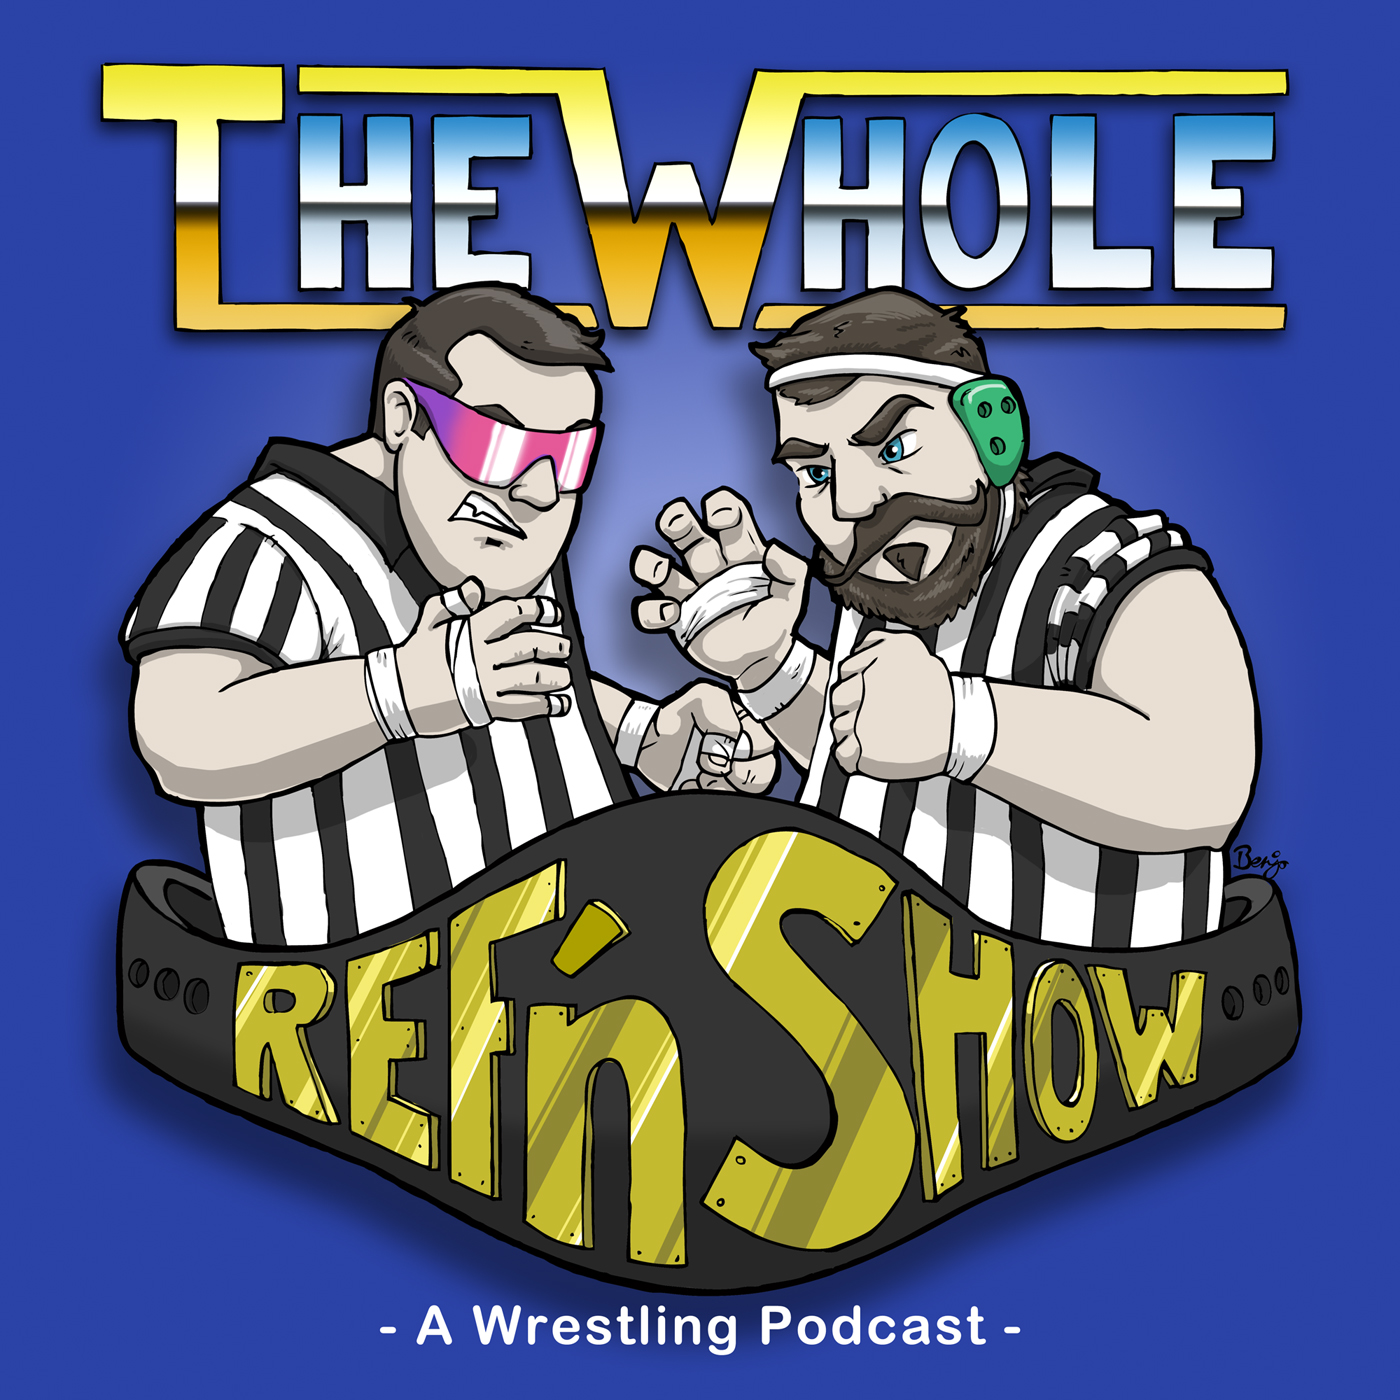 EPISODE #021 - THE ROCK N' ROLL EXPRESS TO THE WWE HALL OF FAME/TEDDY STIGMA INTERVIEW PT1/HEAD TO HEAD: WWE ELIMINATION CHAMBER